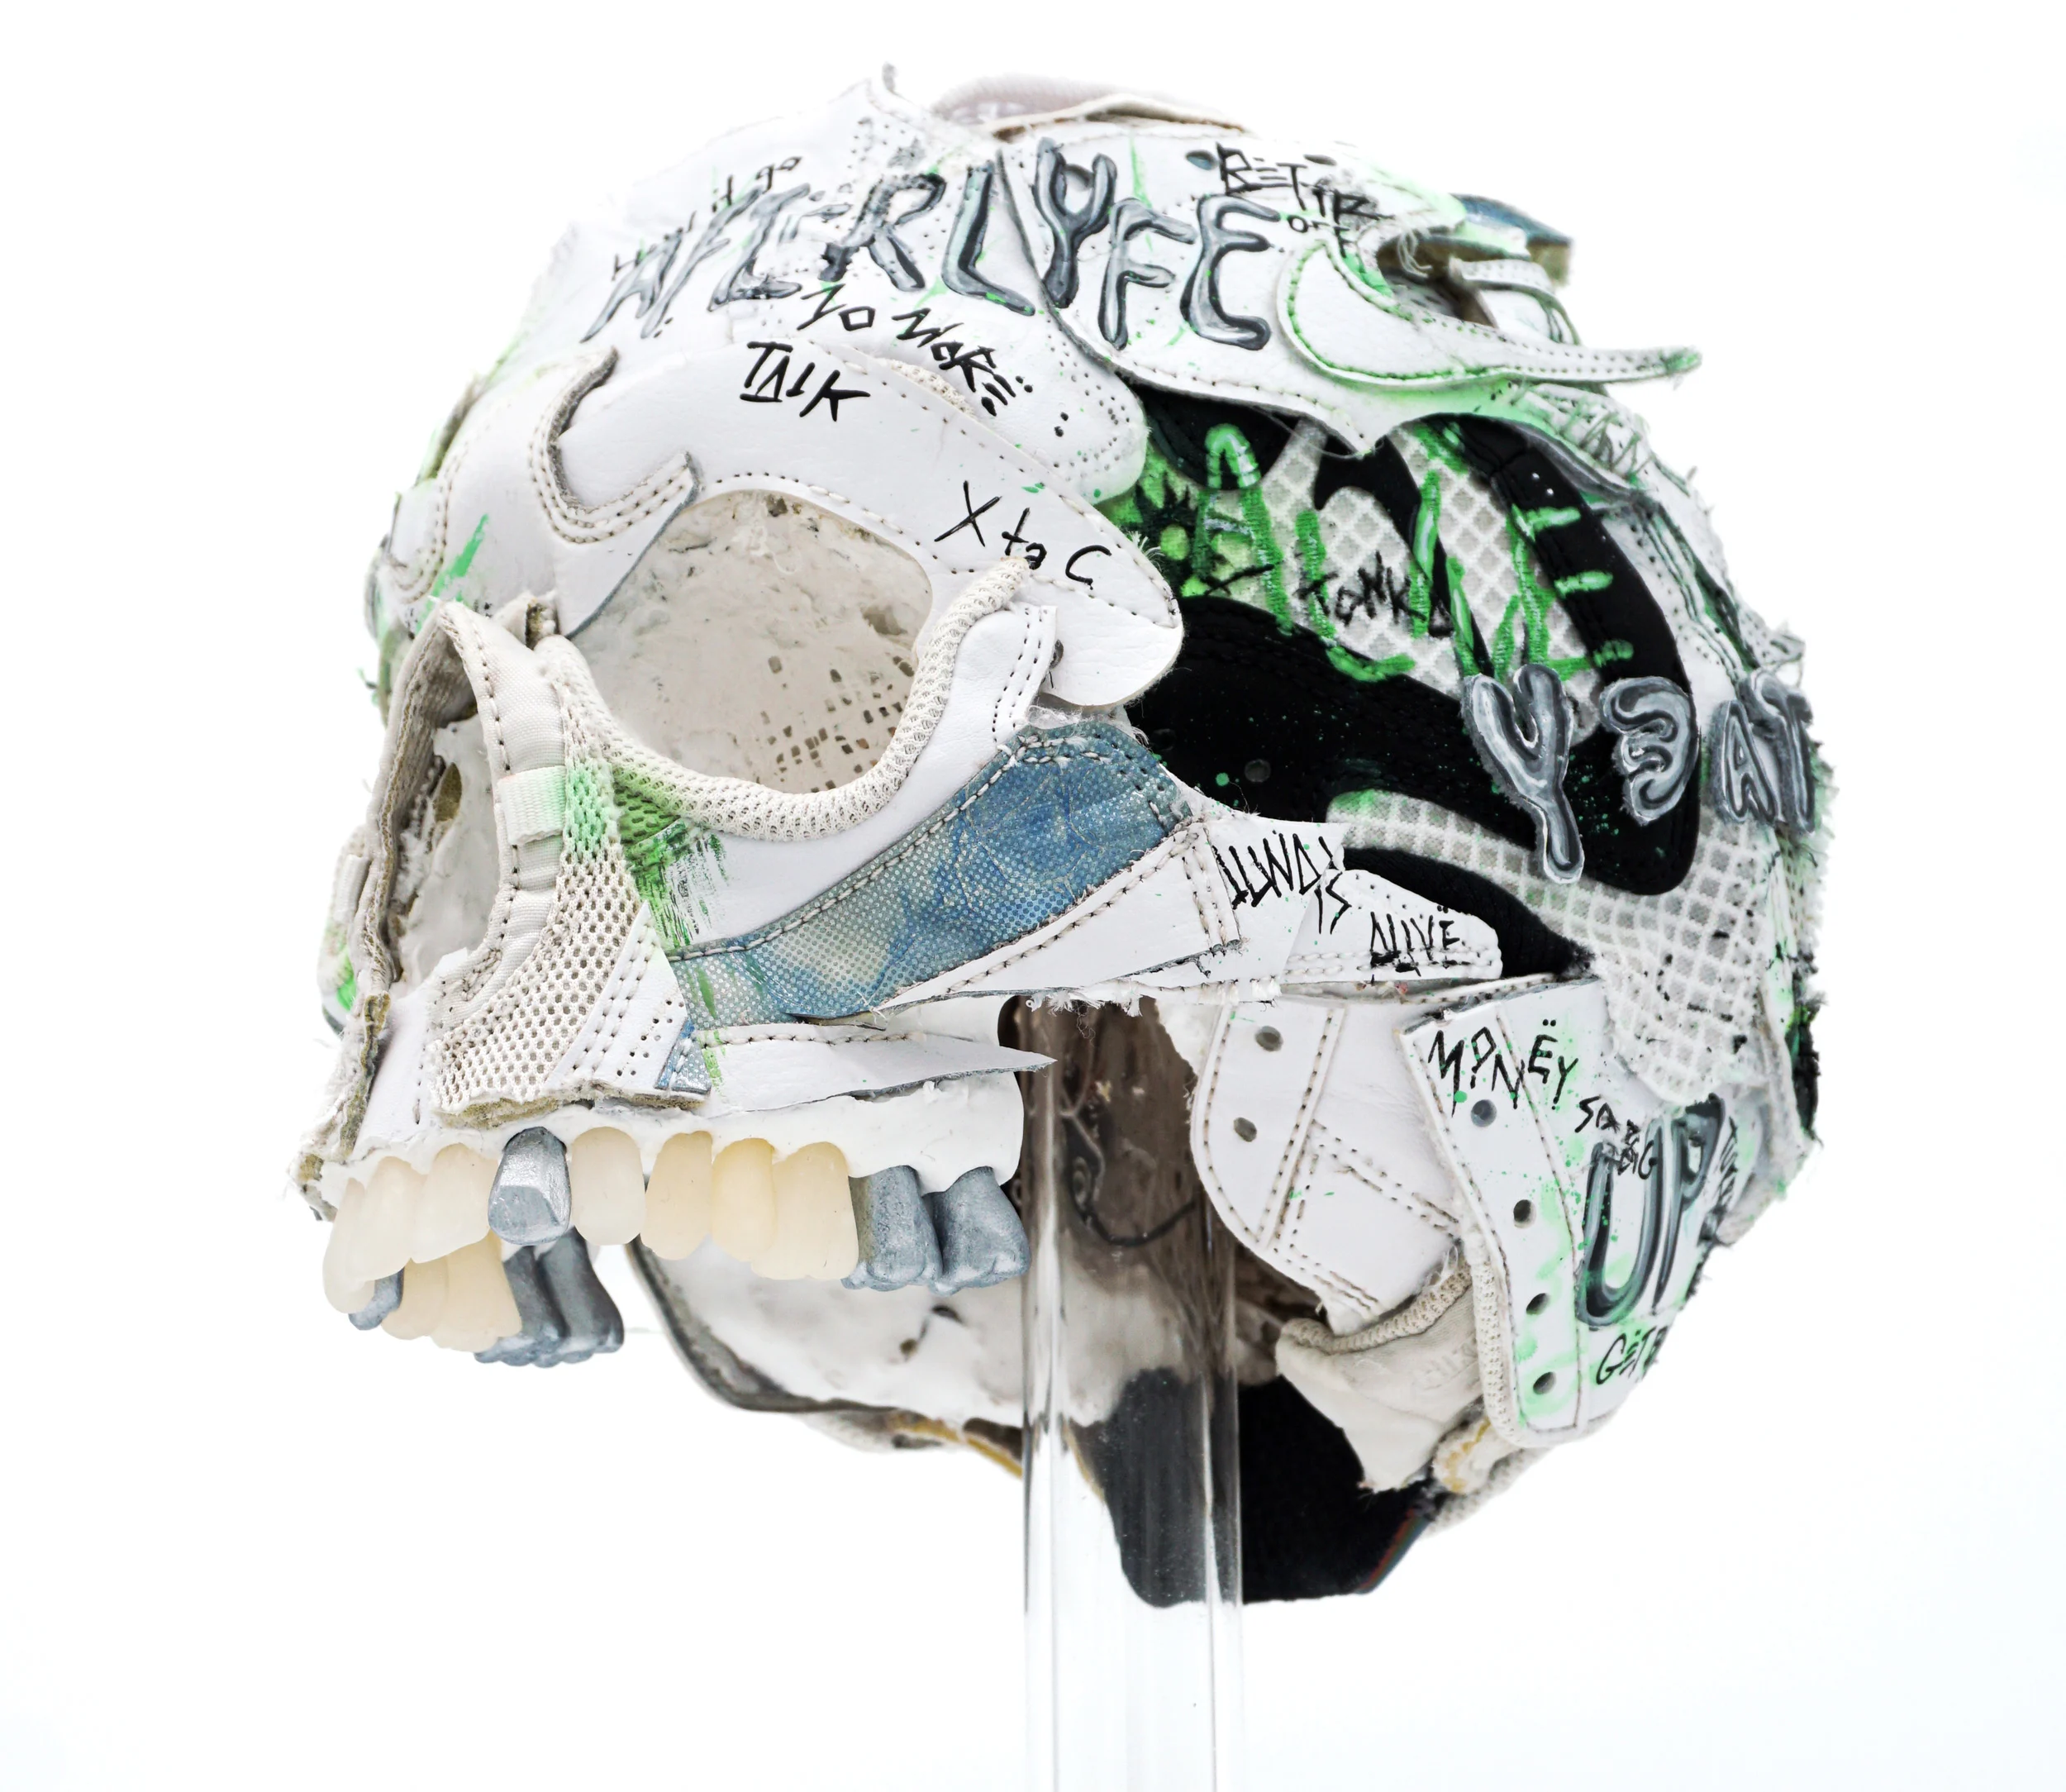 A photograph of a sculpture of a skull, made from pieces of sneakers that have been cut up and painted.
